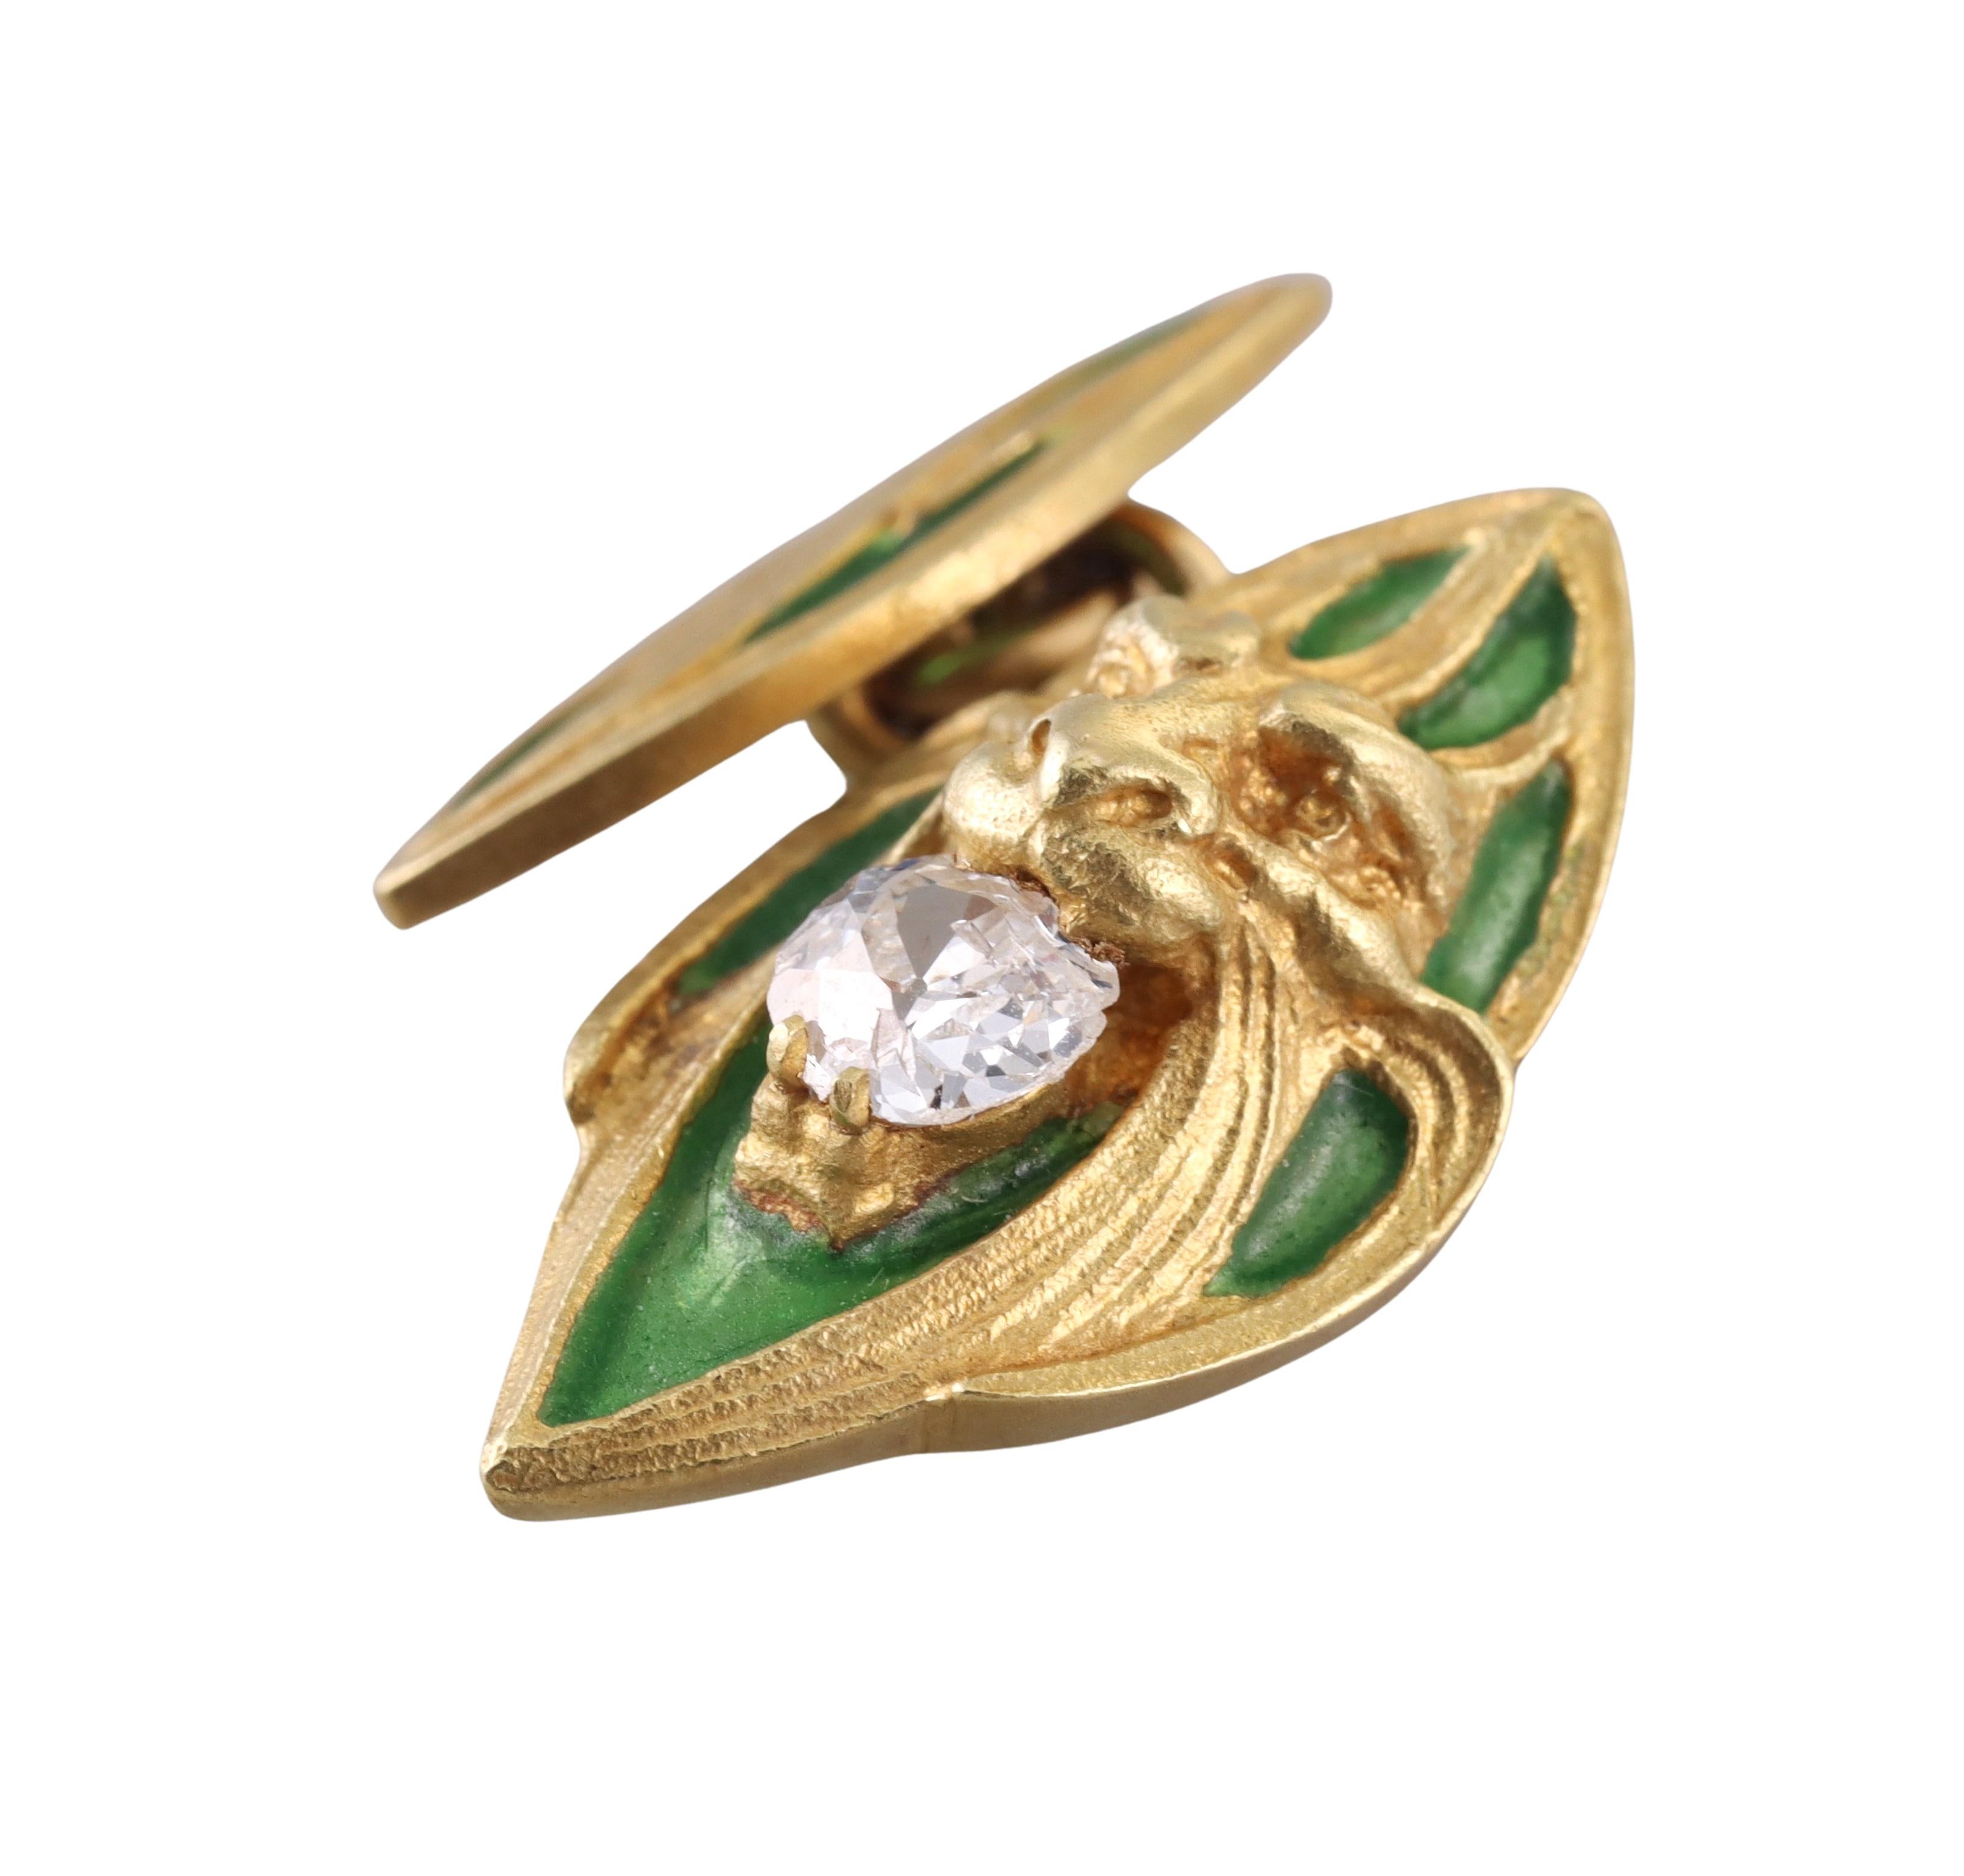 Pair of antique Art Nouveau era cufflinks in 18k yellow gold, decorated with bright green enamel and approx. 0.40ct old mine cut diamond in each.  Top of the cufflink measures 7/8